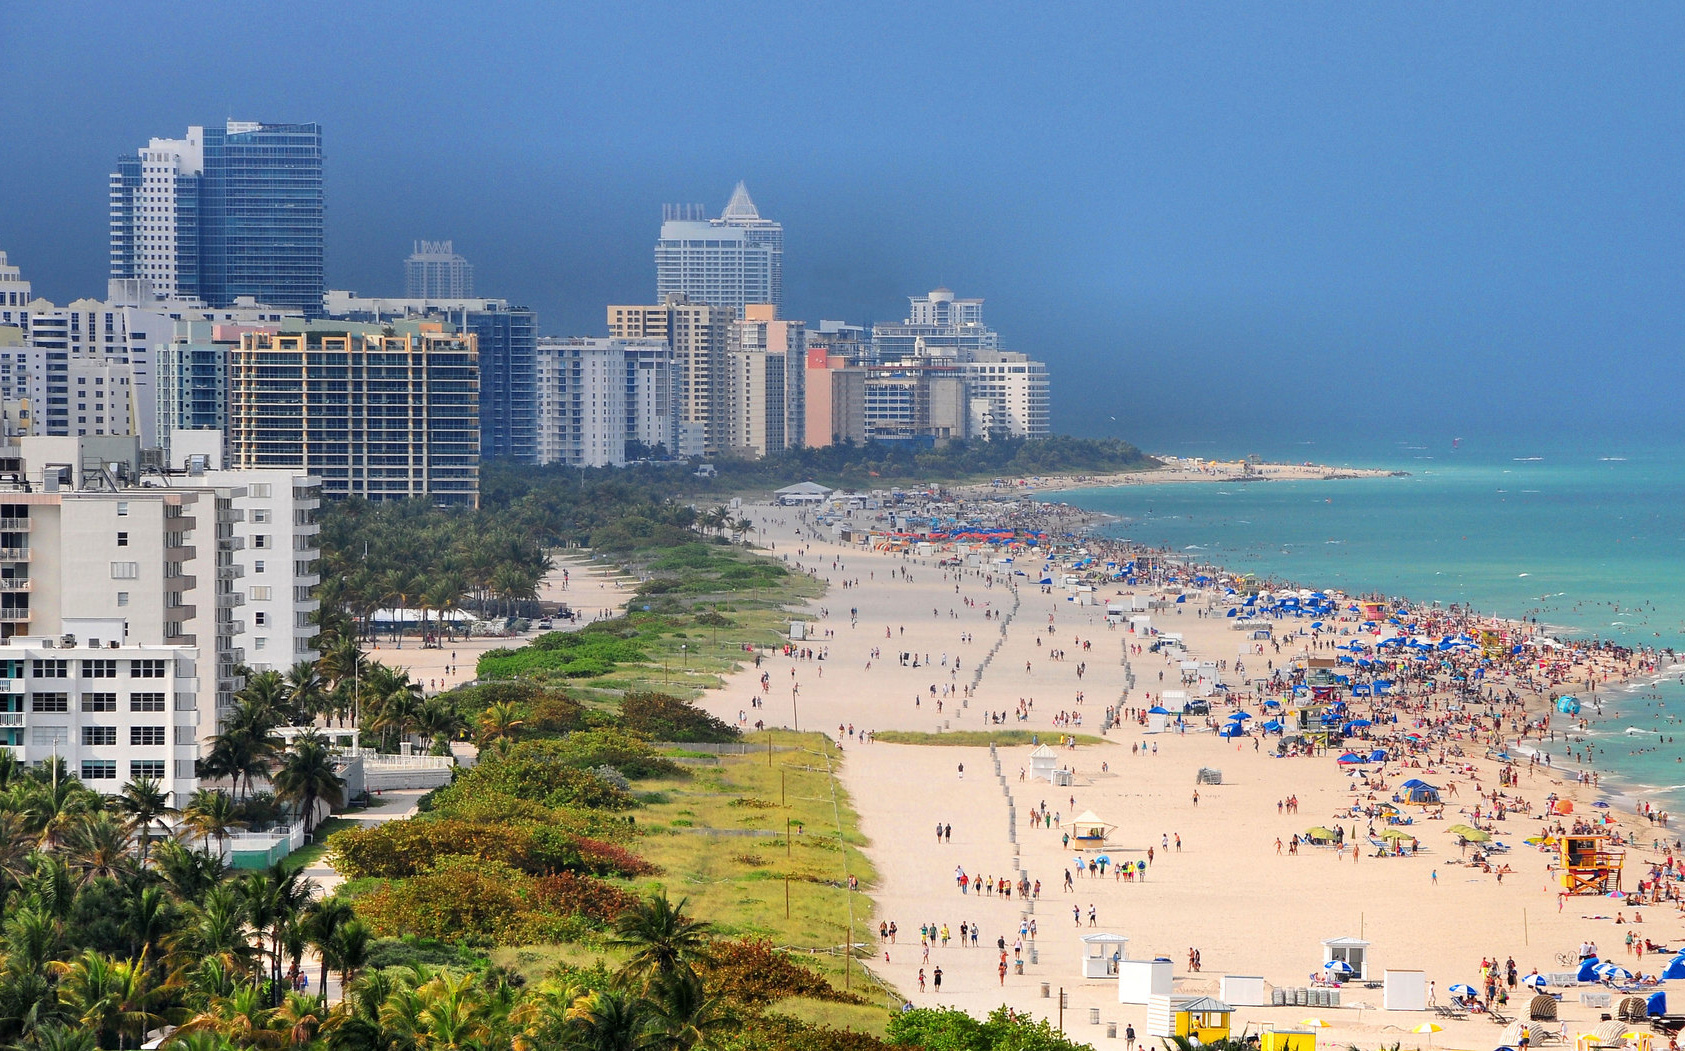 best time to visit south beach florida